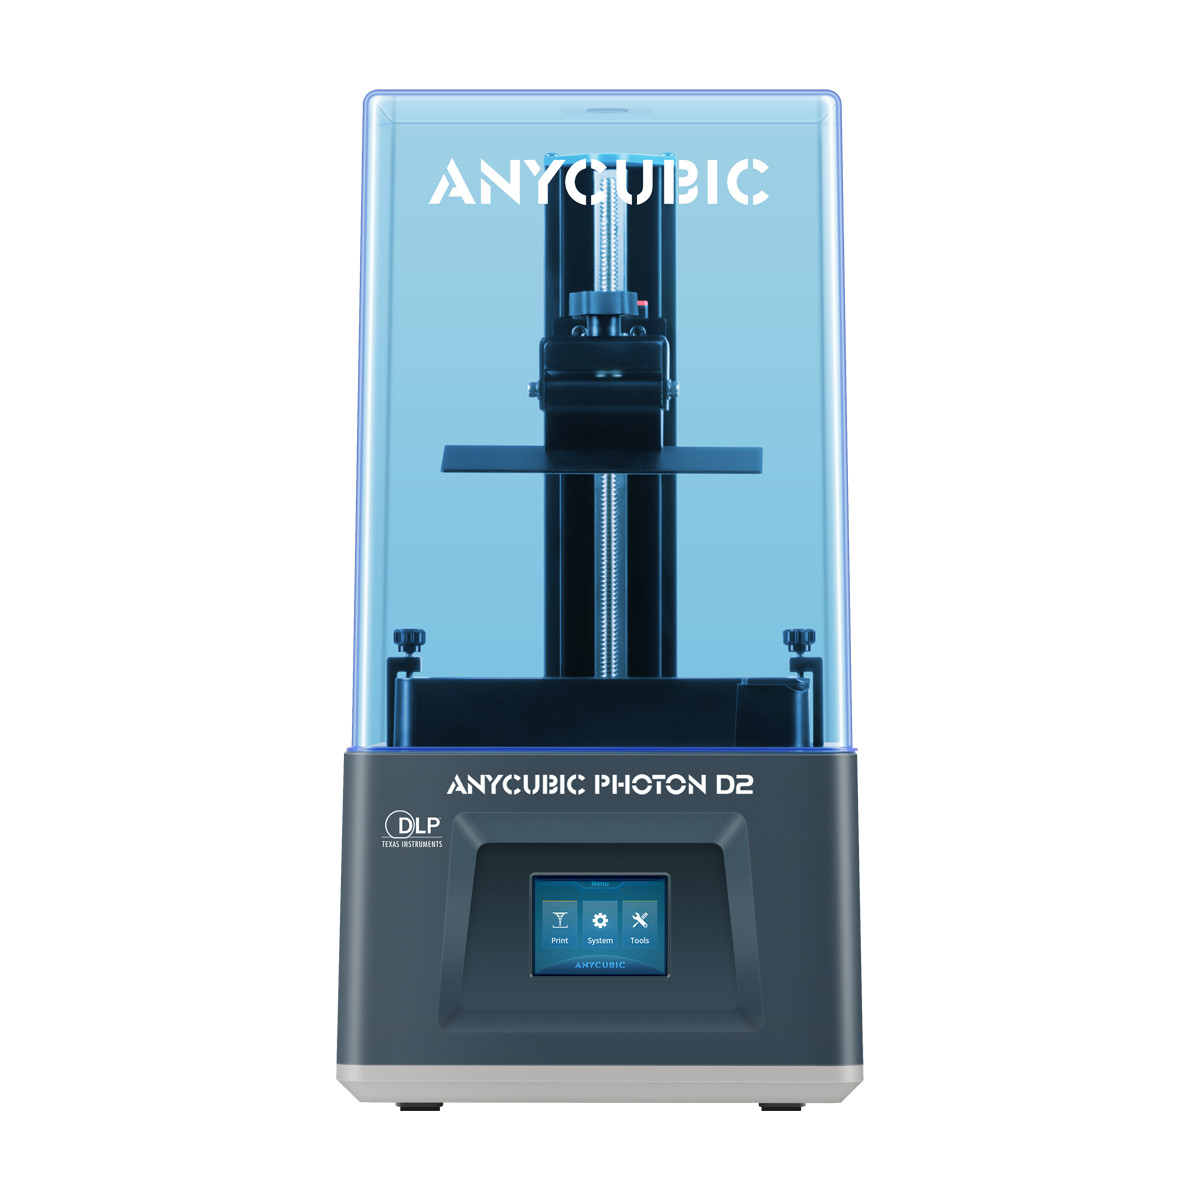 Anycubic Photon D2 Review